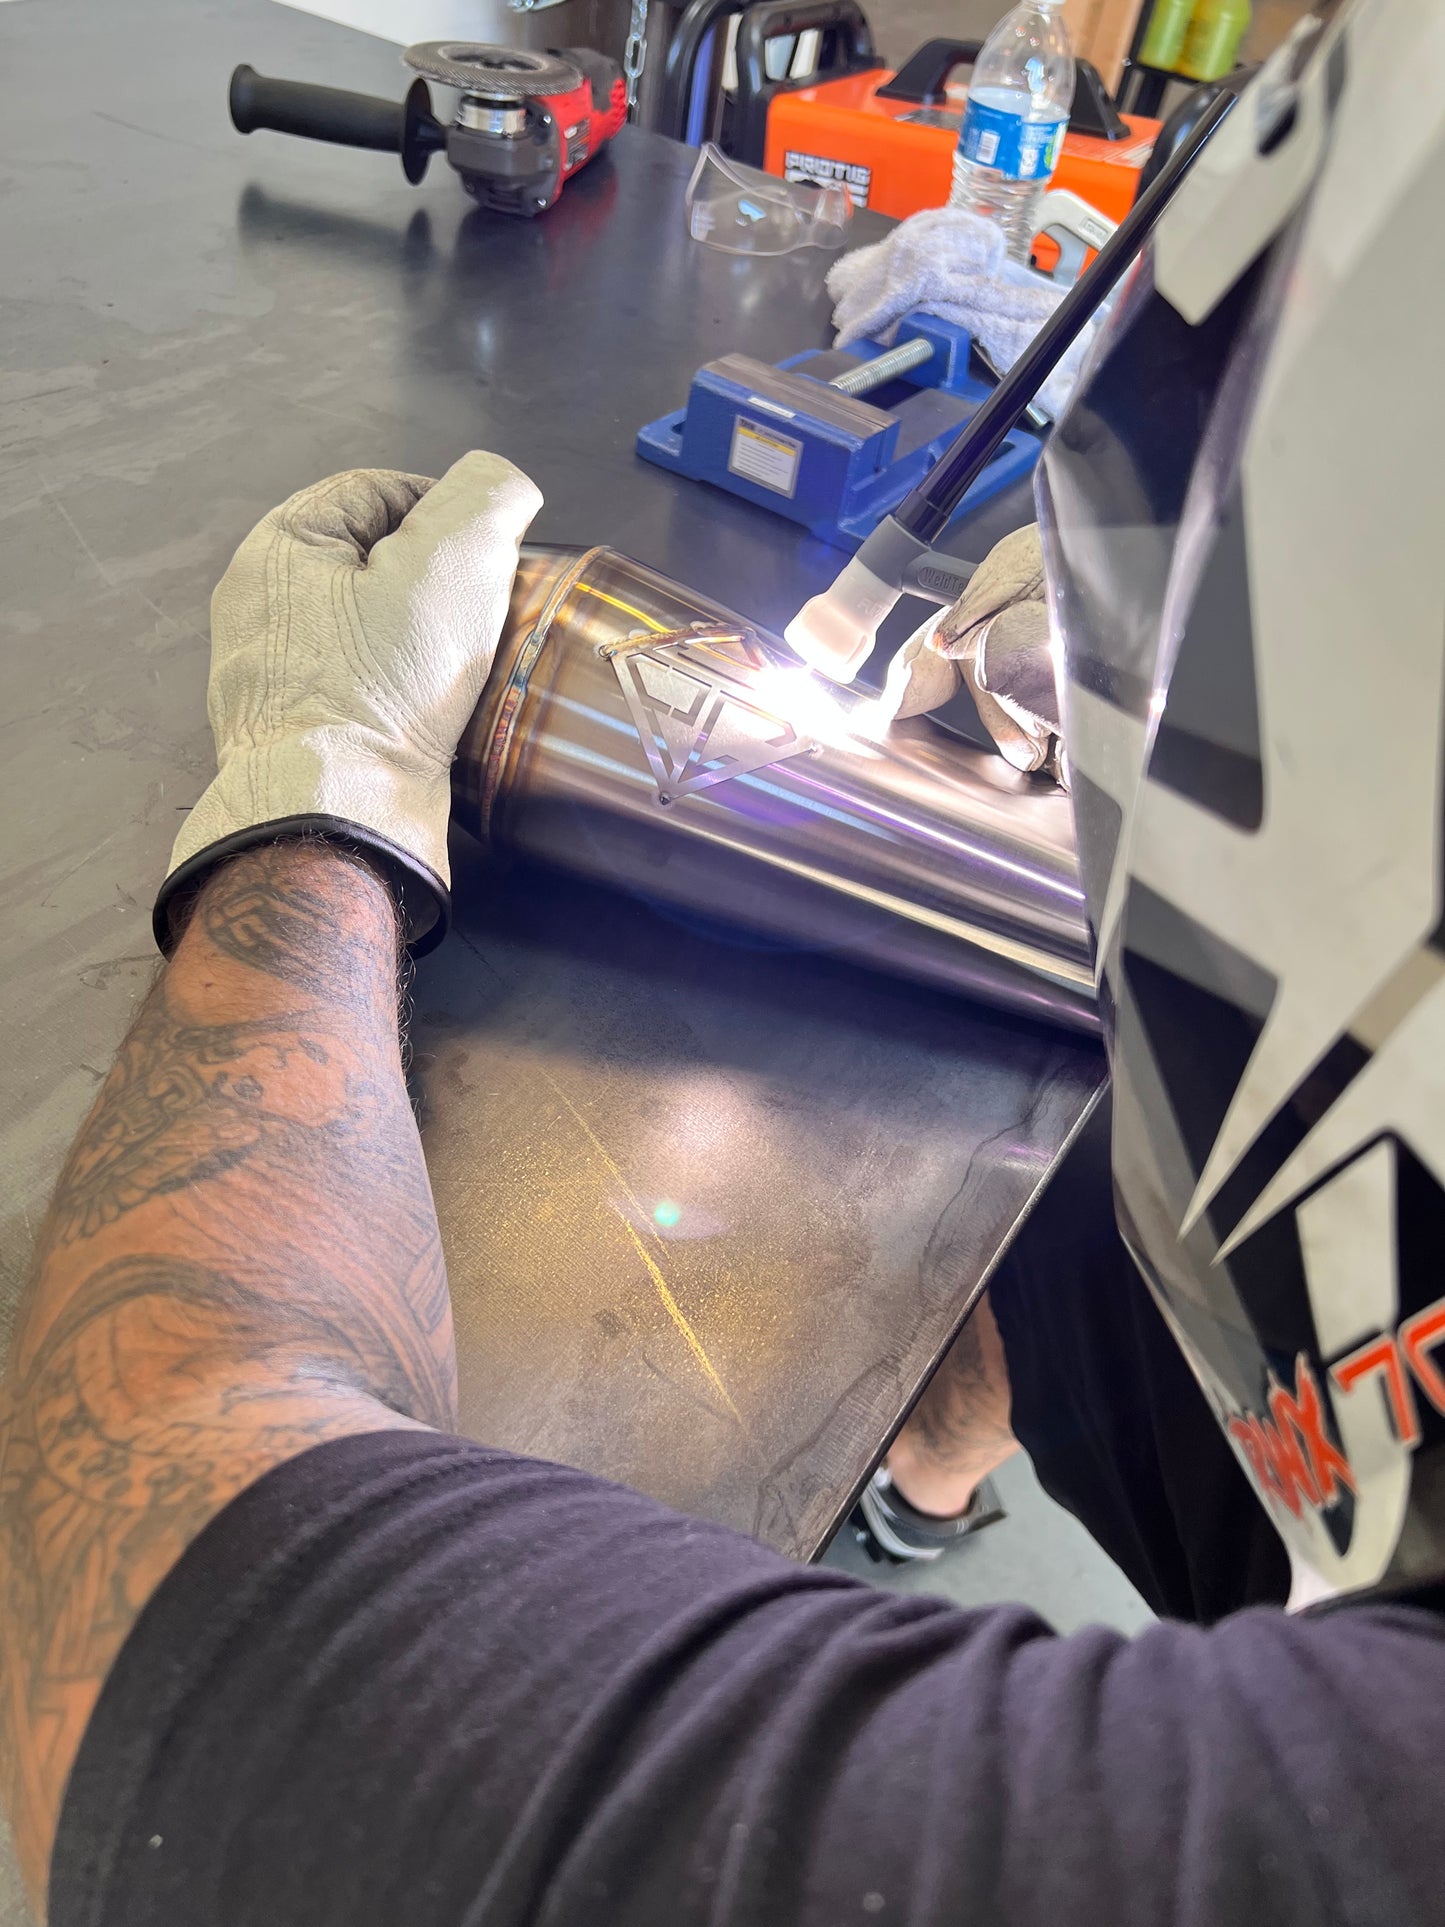 Tig welded Cutback Exhaust made for the Harley Davison M8 Bagger